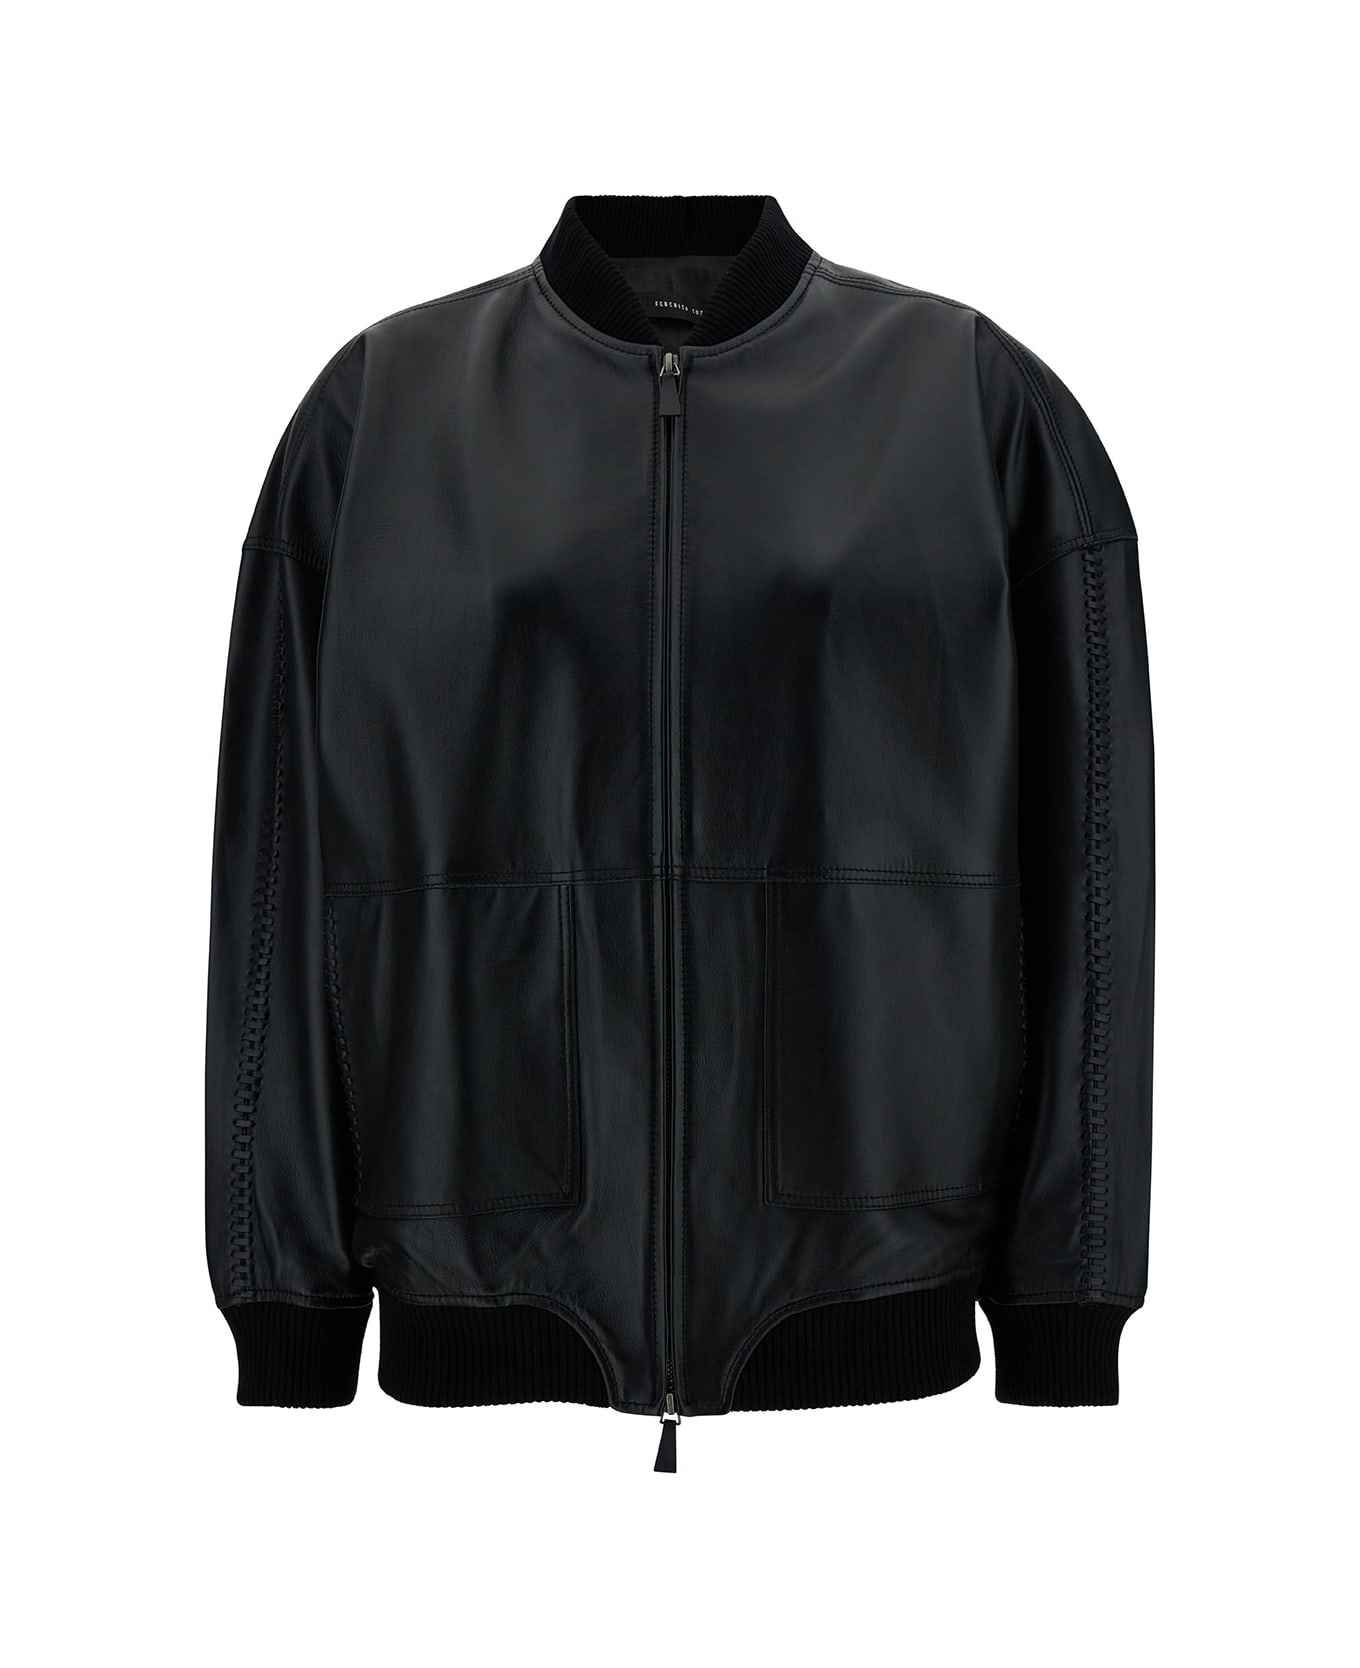 Federica Tosi Black Bomber Jacket With Ribbed Trim In Leather Woman - Black